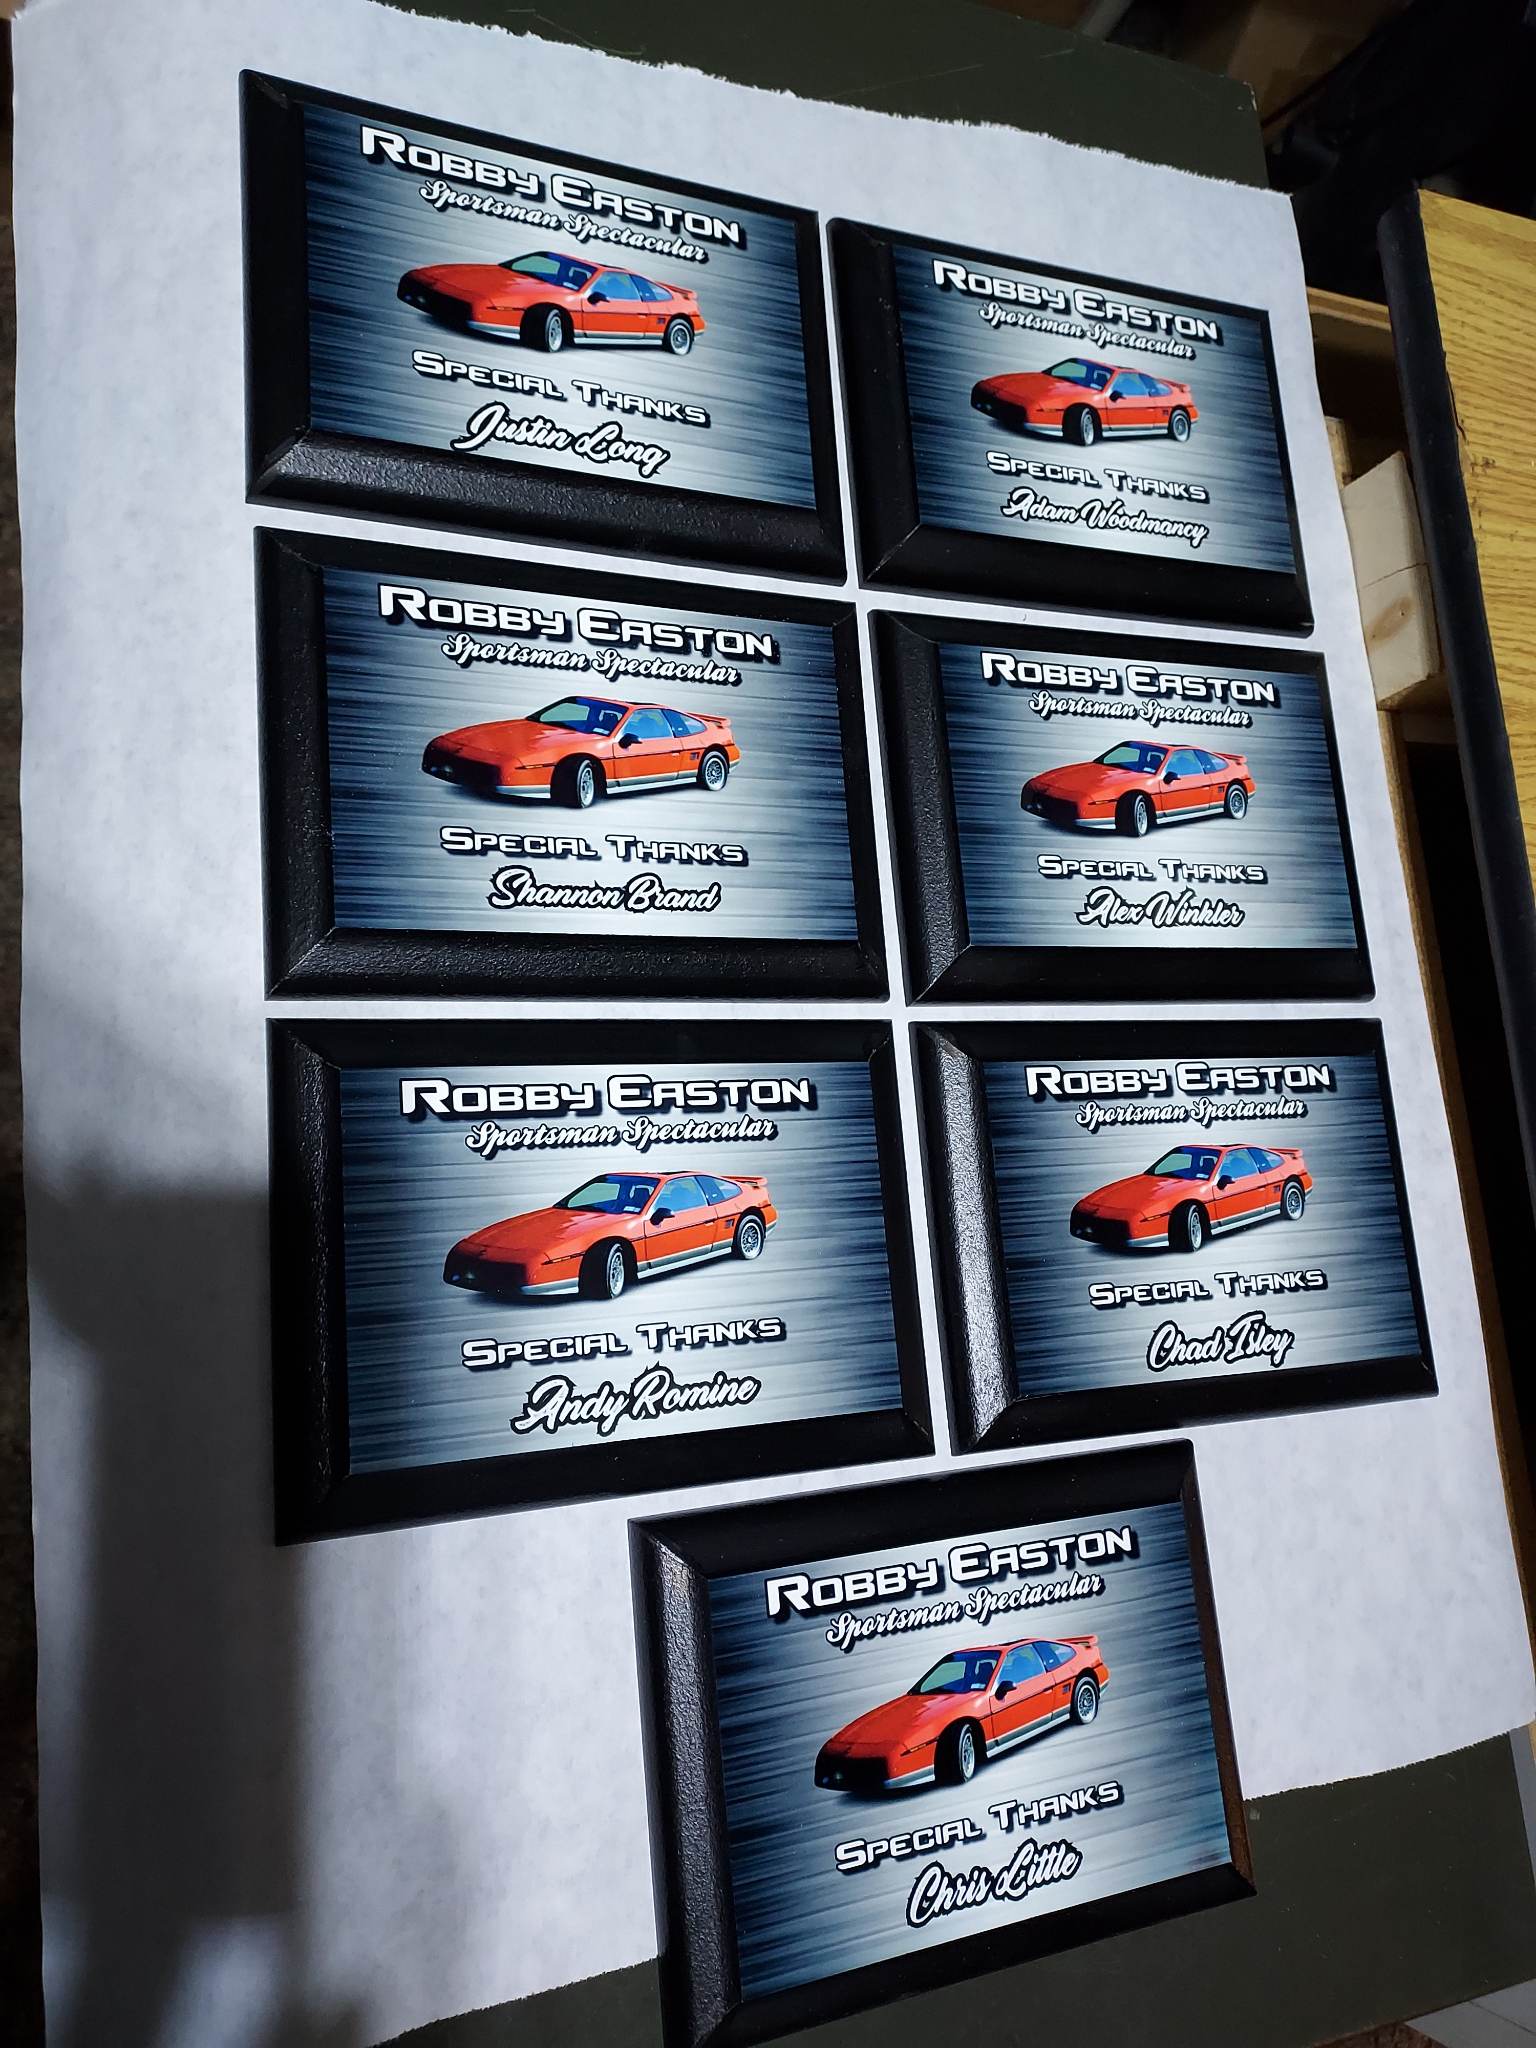 Racing Banquet Awards made with sublimation printing